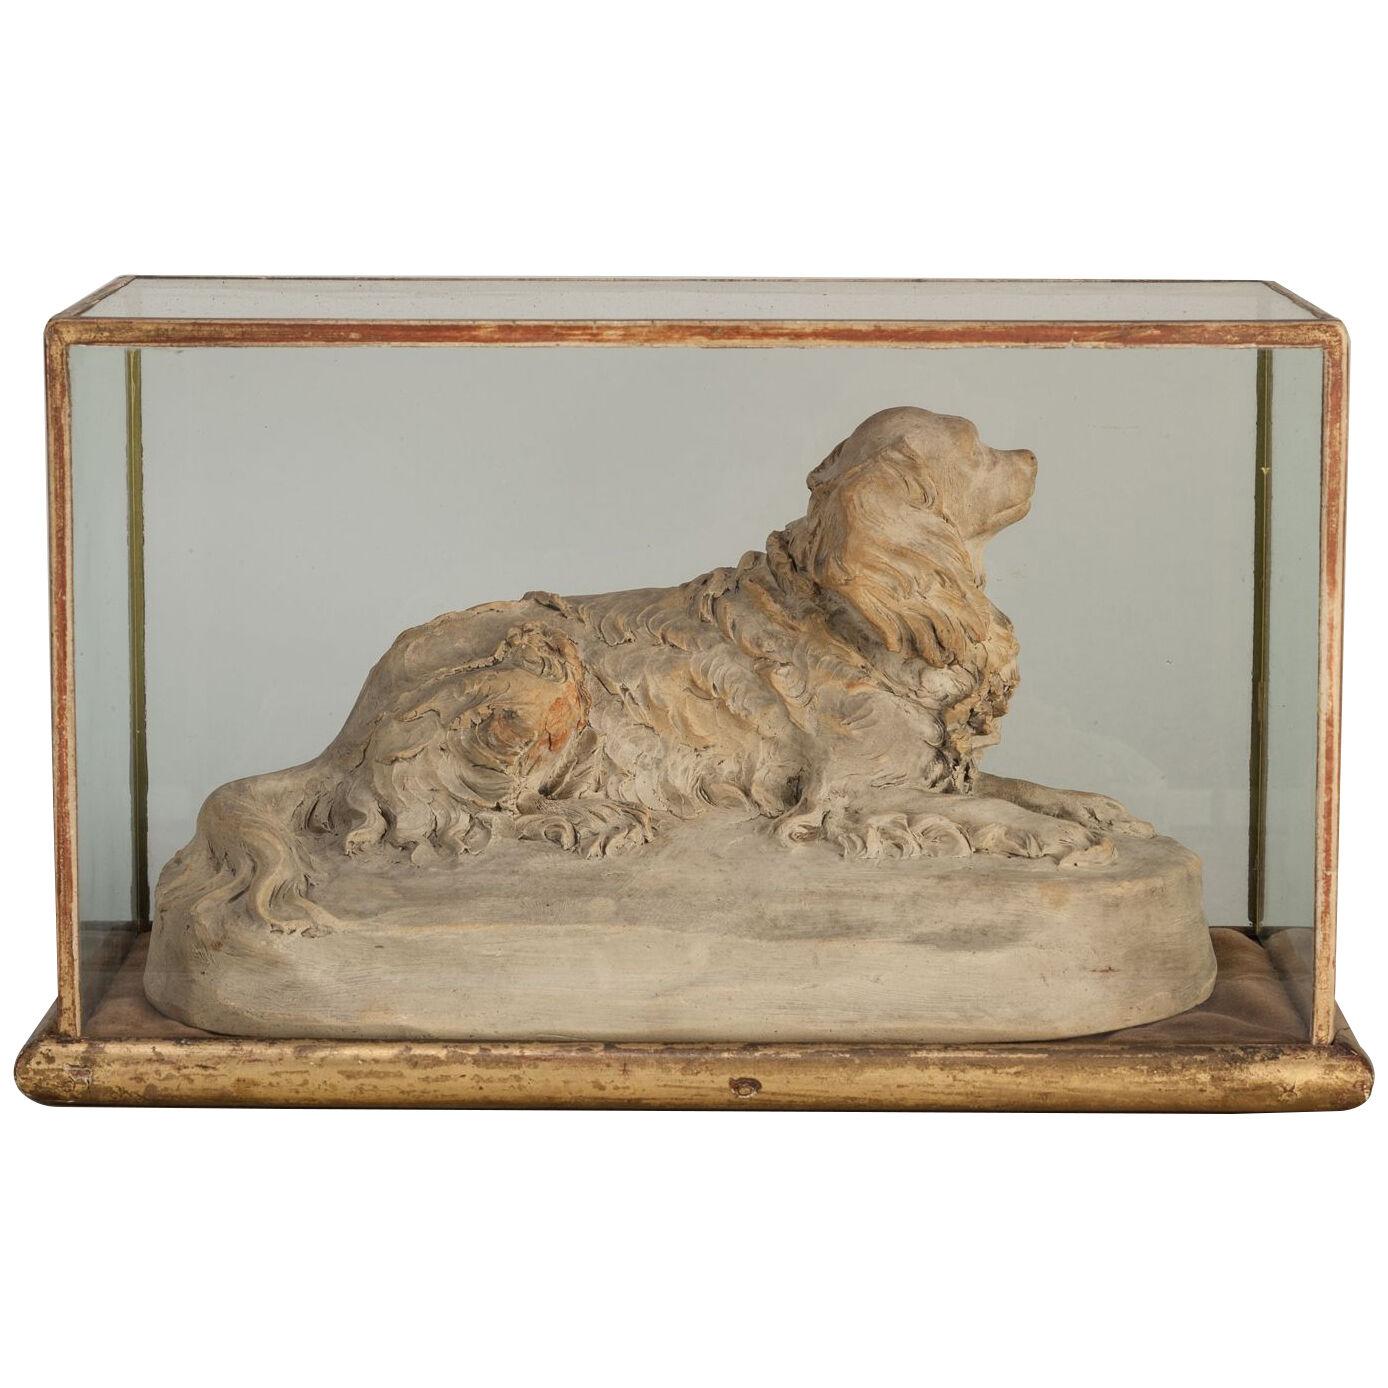 Clay Model of Dog by Benedetto Sangiovanni